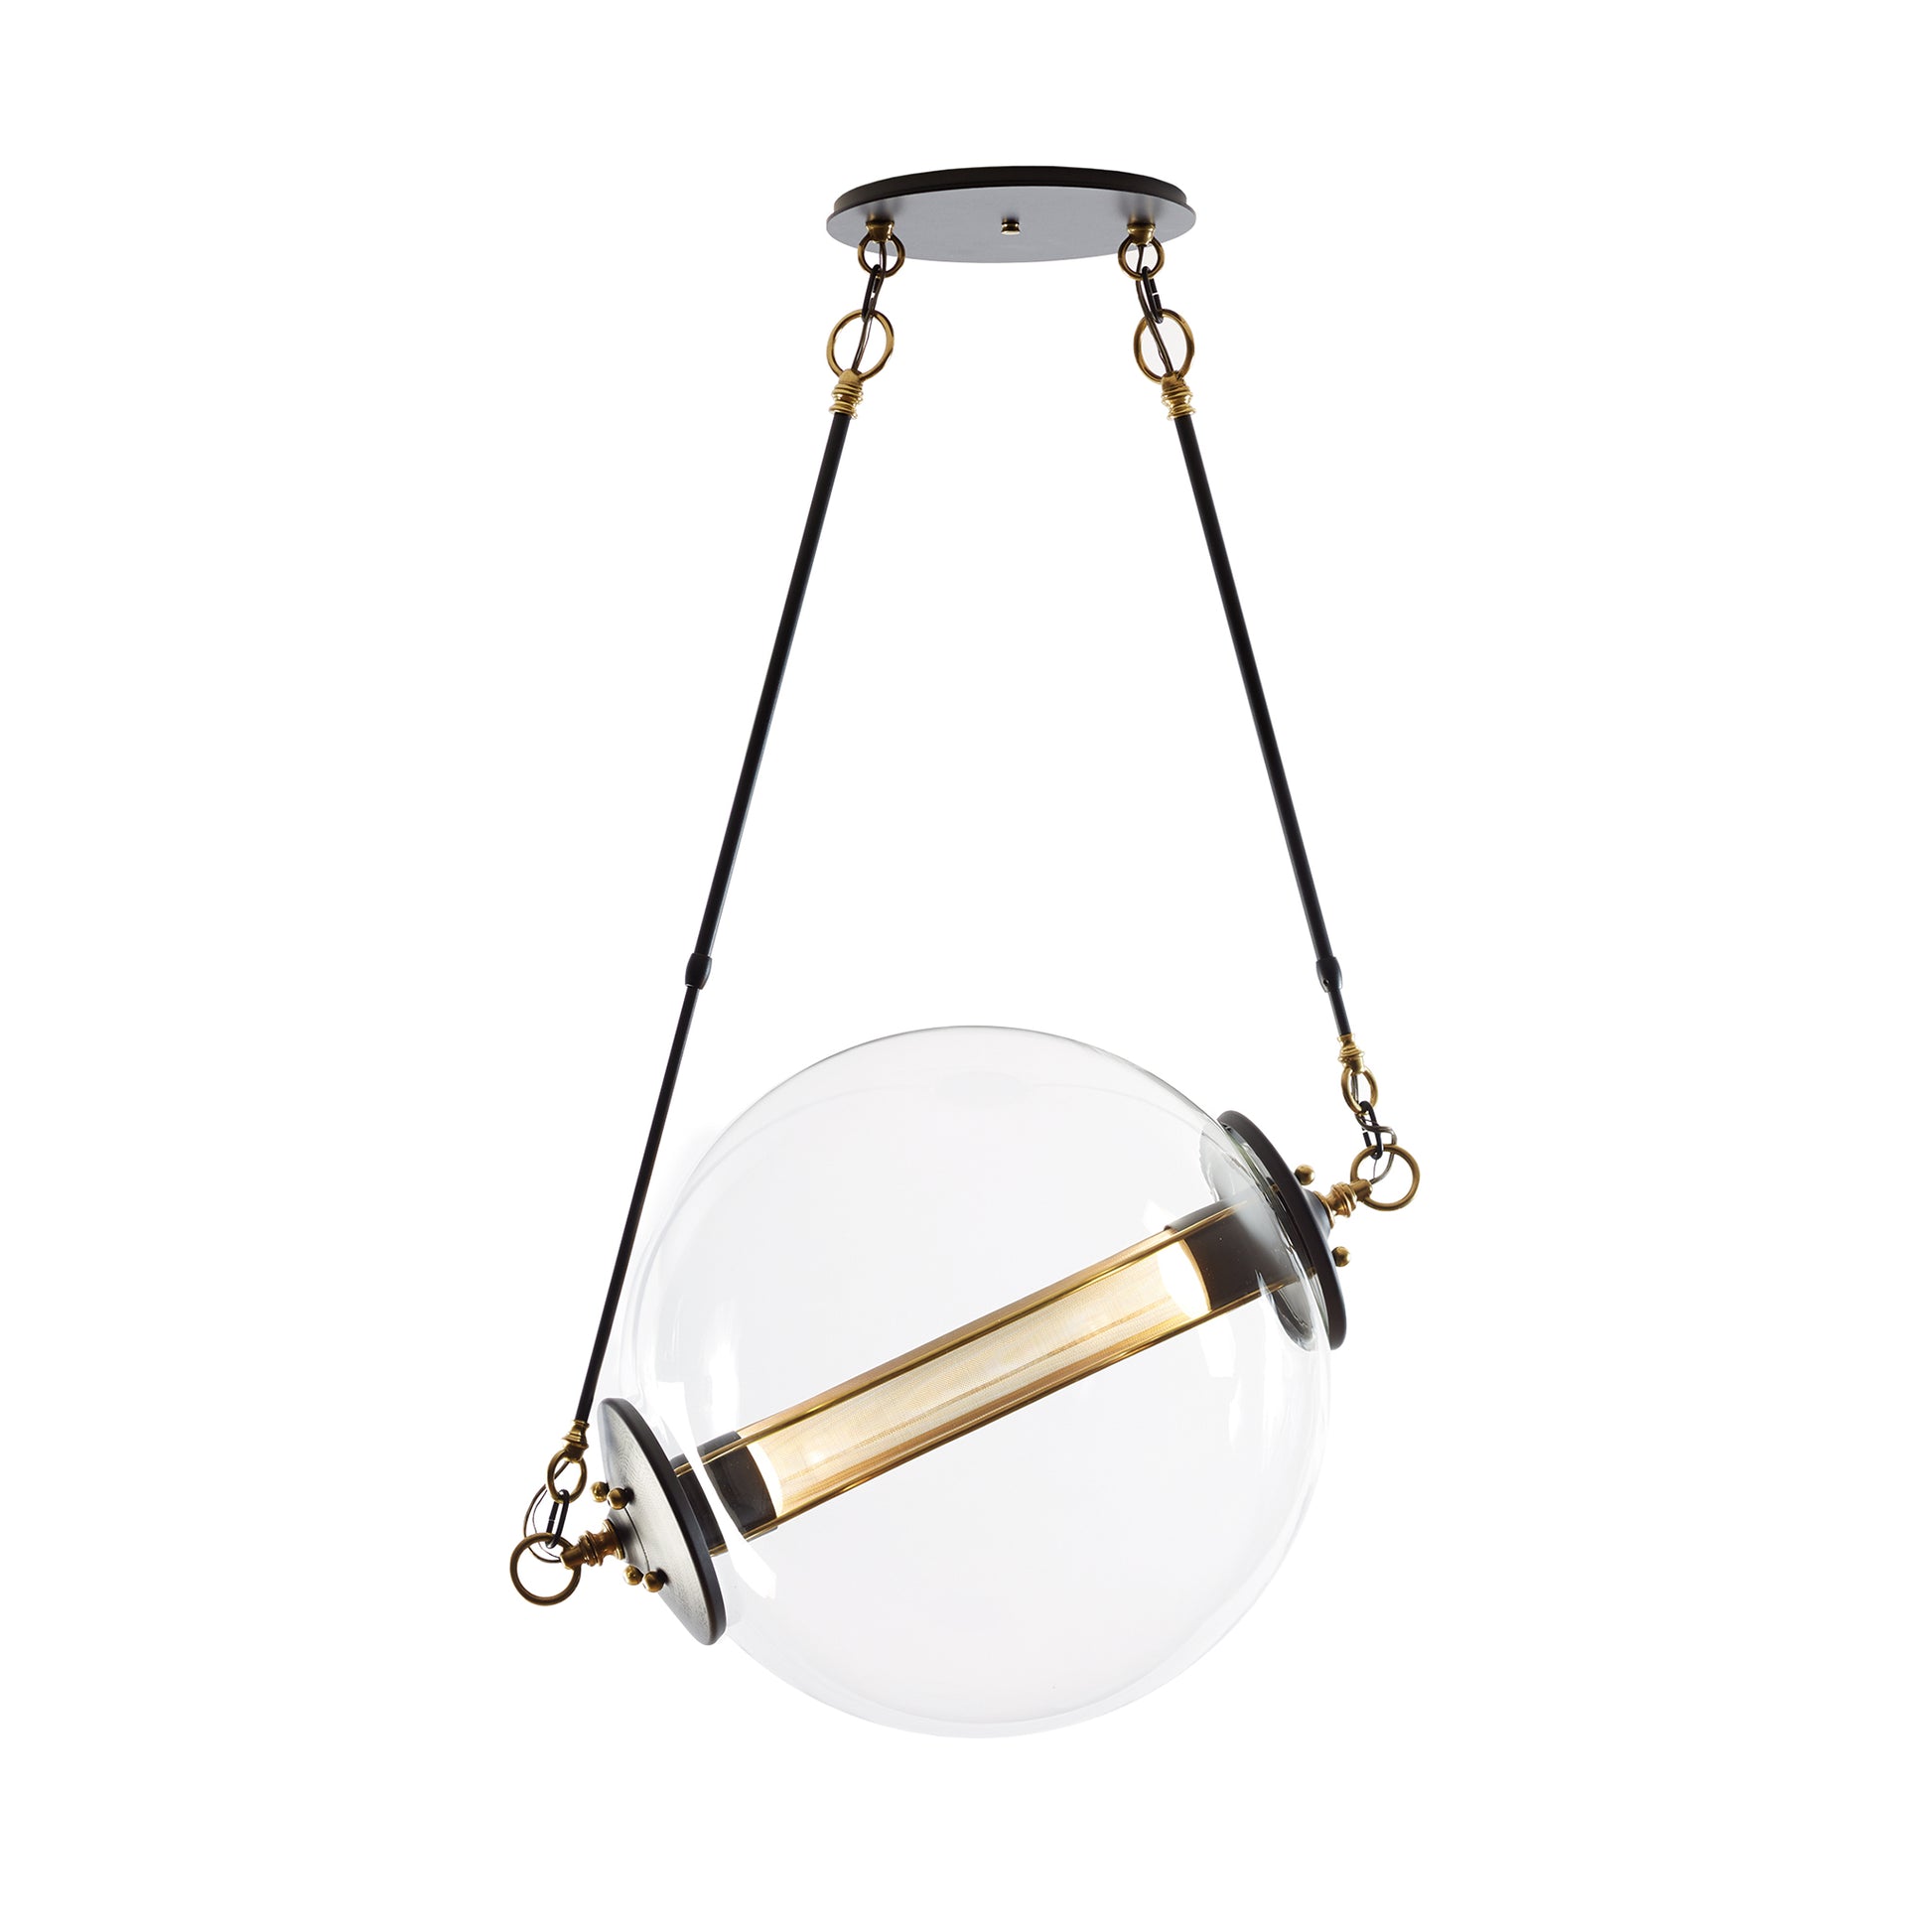 A Hubbardton Forge Otto Sphere Pendant with a glass globe hanging from it, providing elegant lighting.